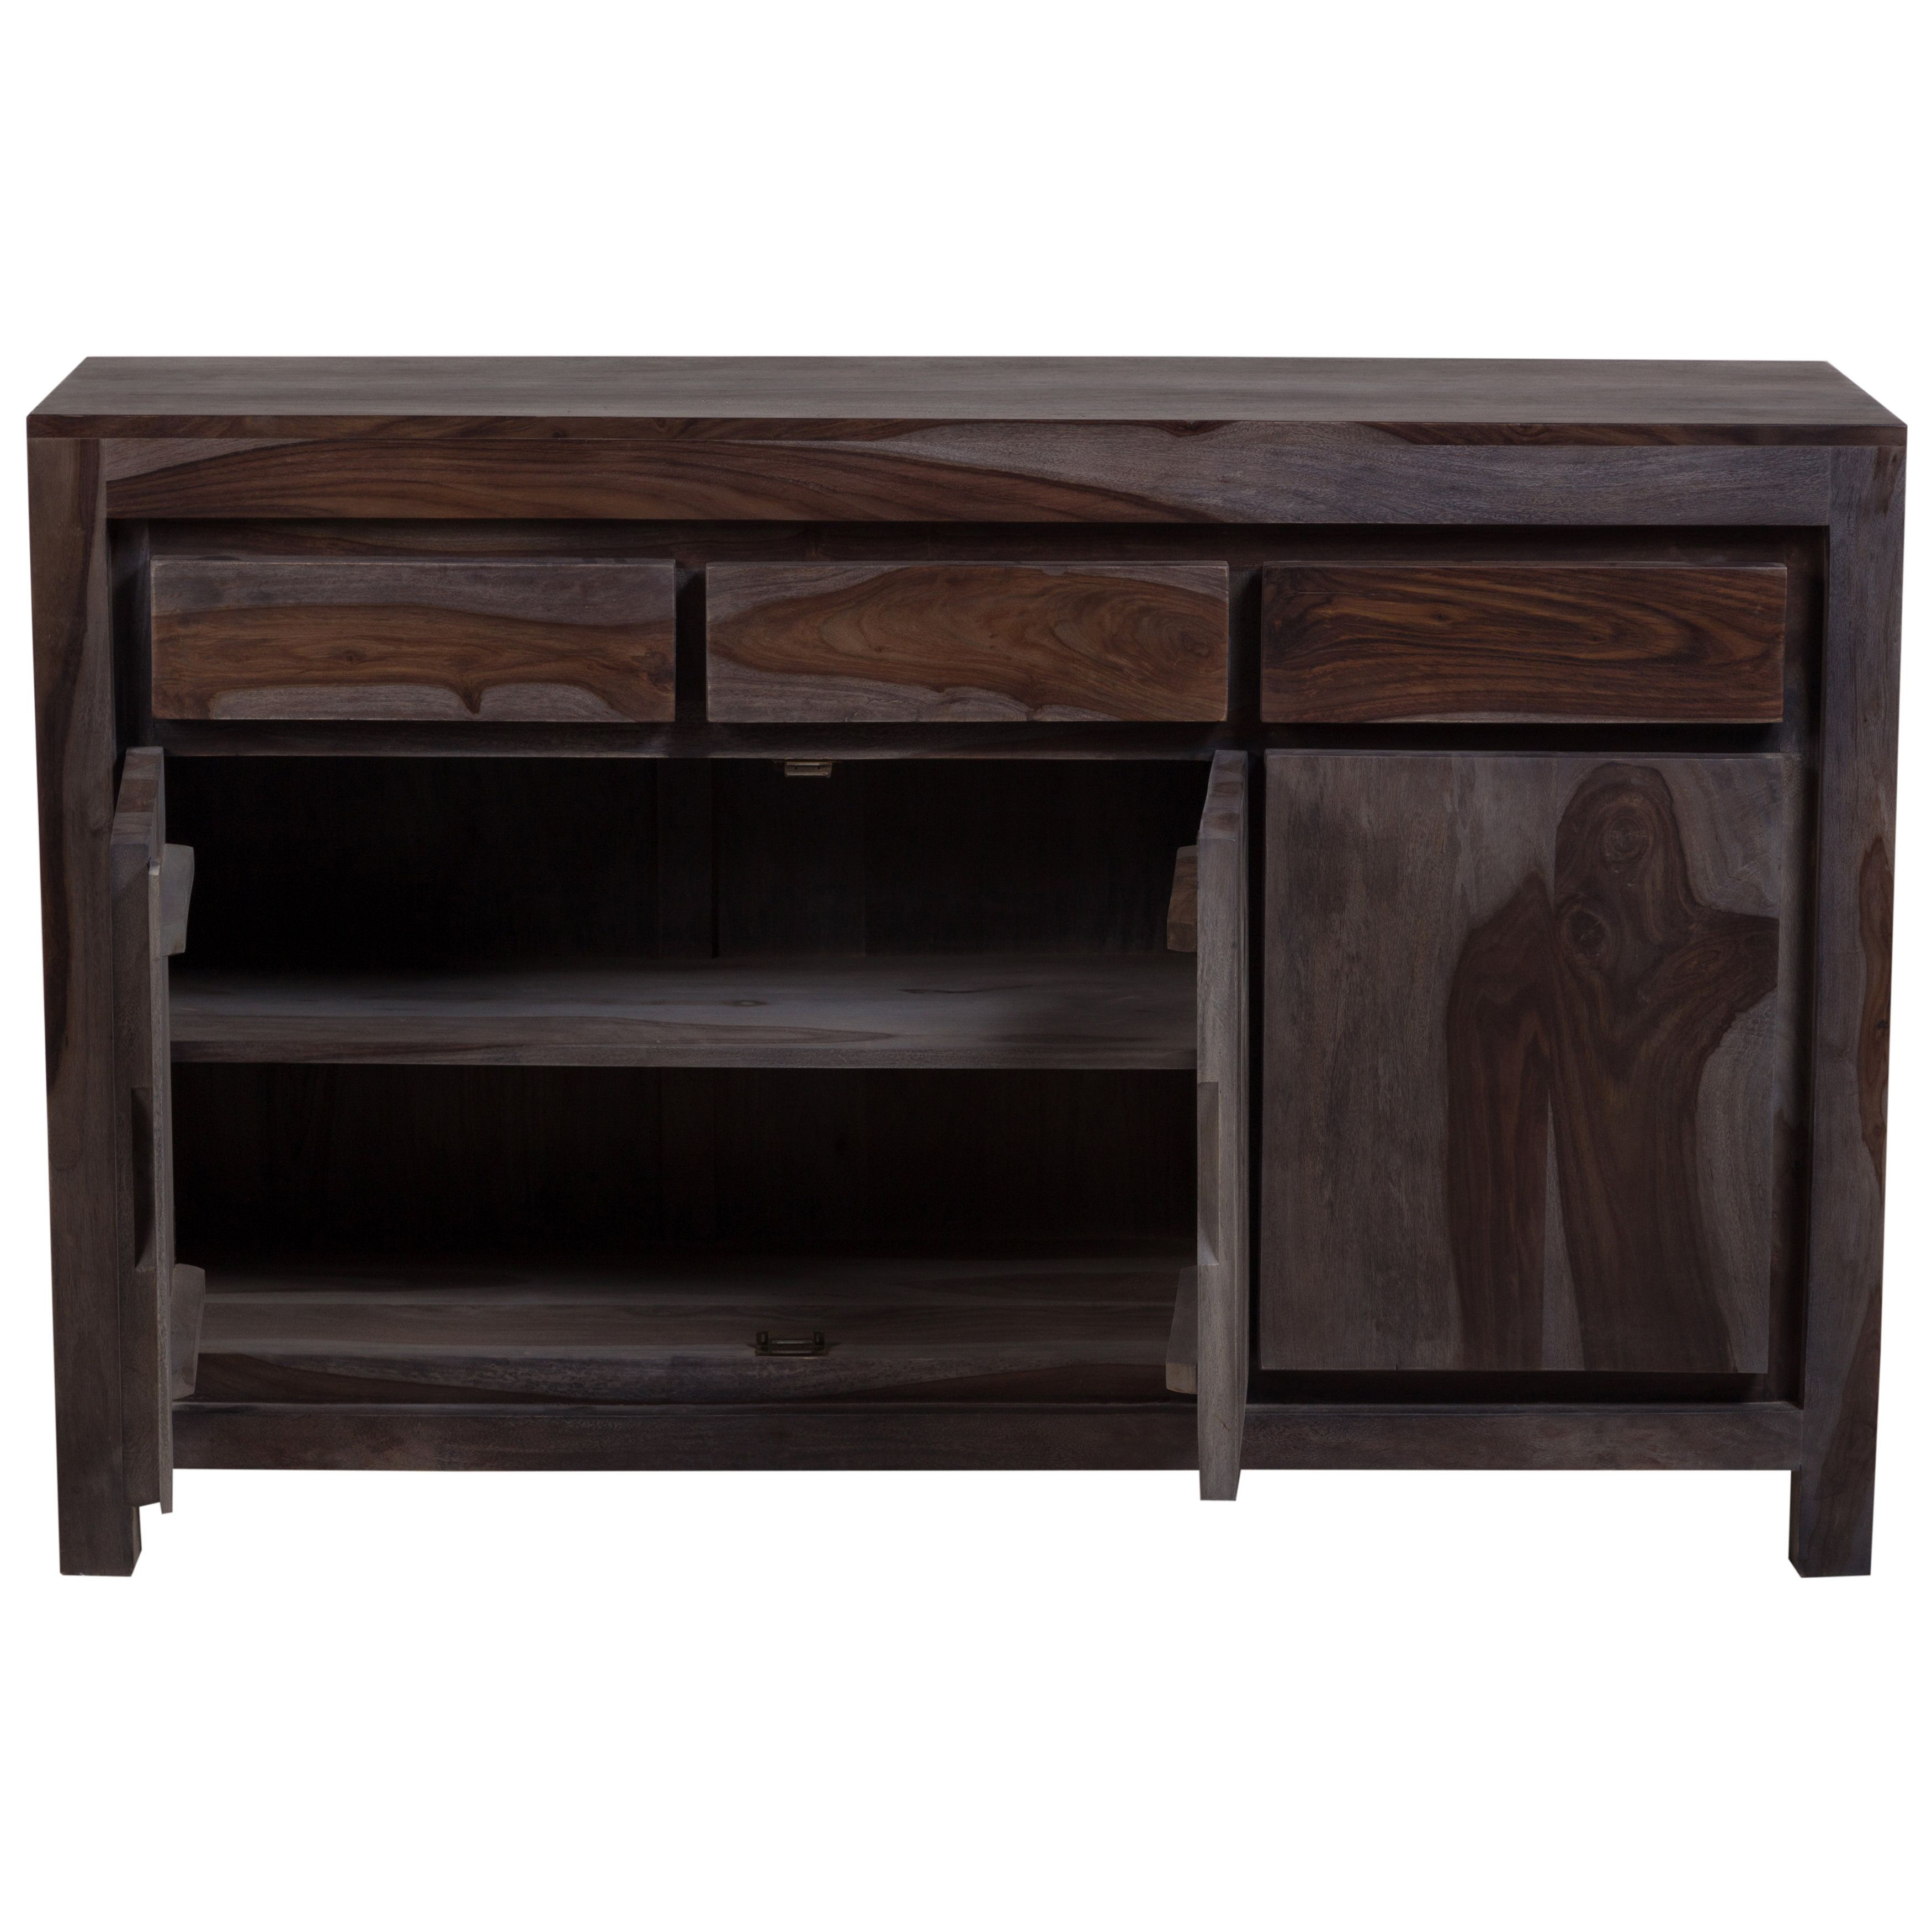 Pereyra Sideboard Within Recent Thatcher Sideboards (View 3 of 20)